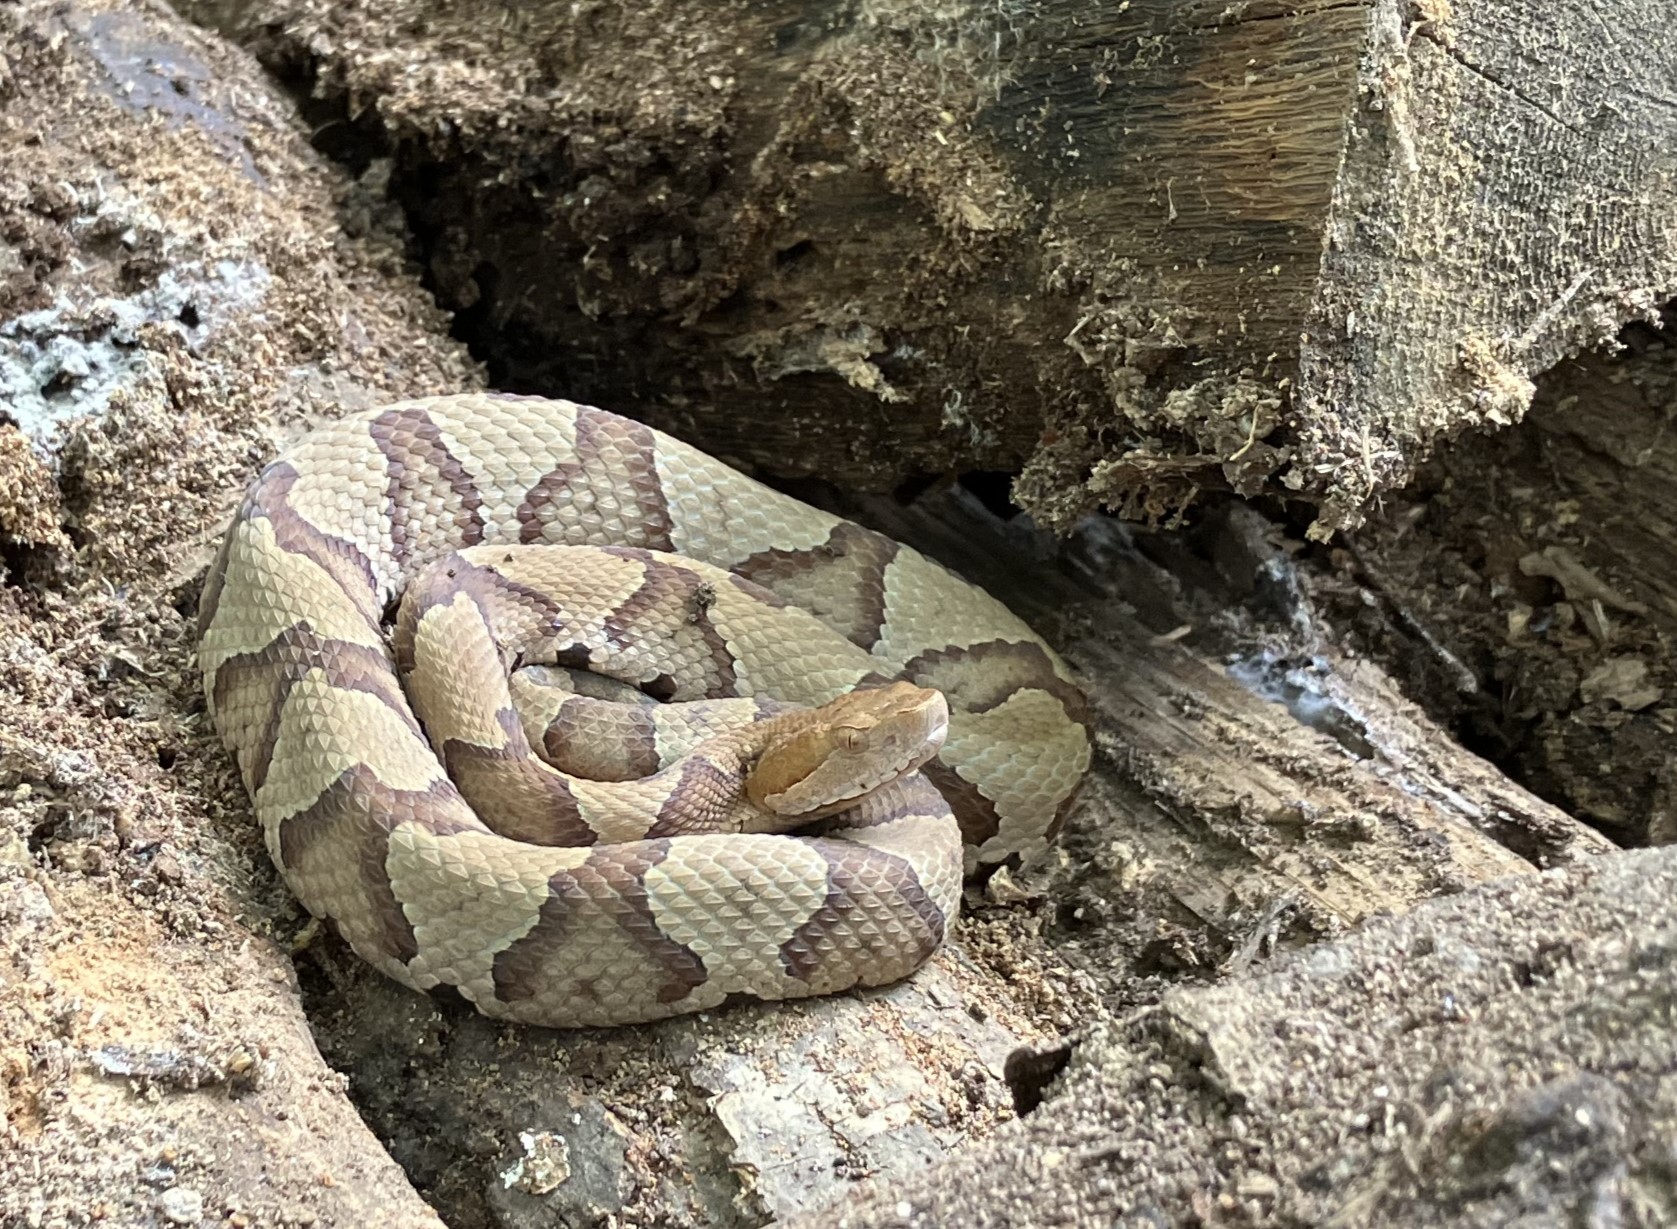 photo of a coiled copperhead